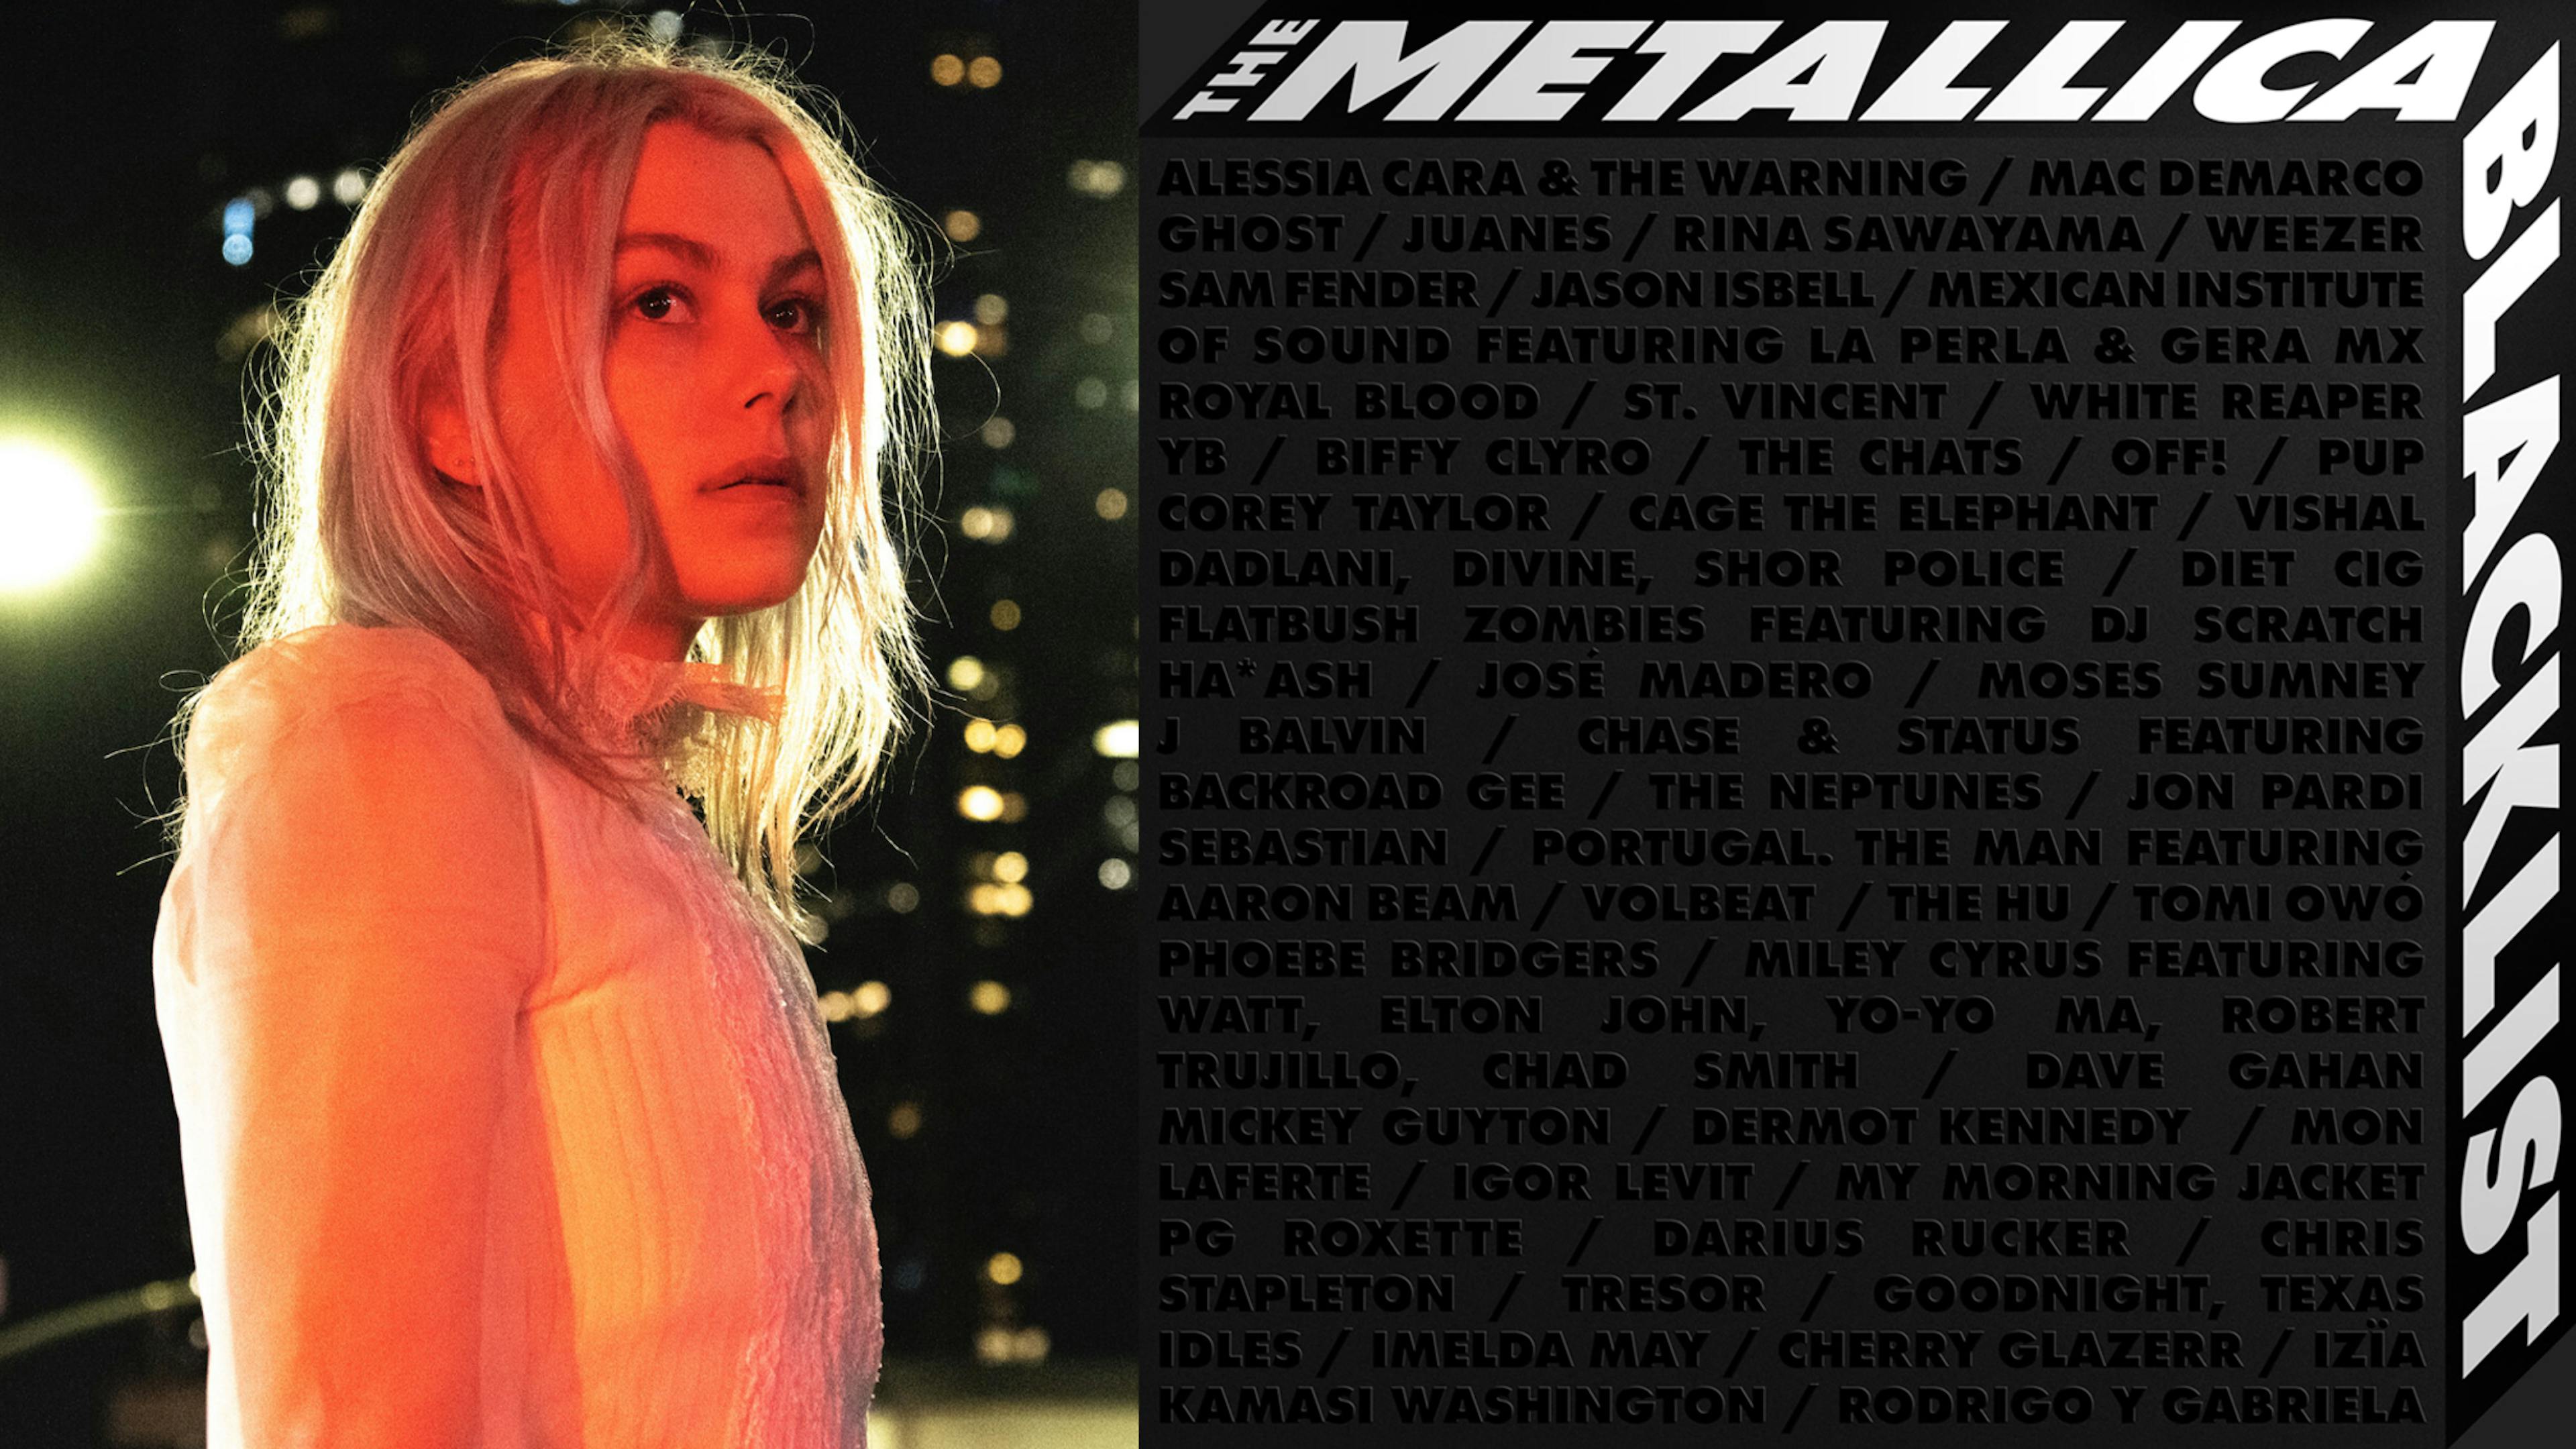 Phoebe Bridgers takes "Billie Eilish approach" on haunting cover of Metallica's Nothing Else Matters